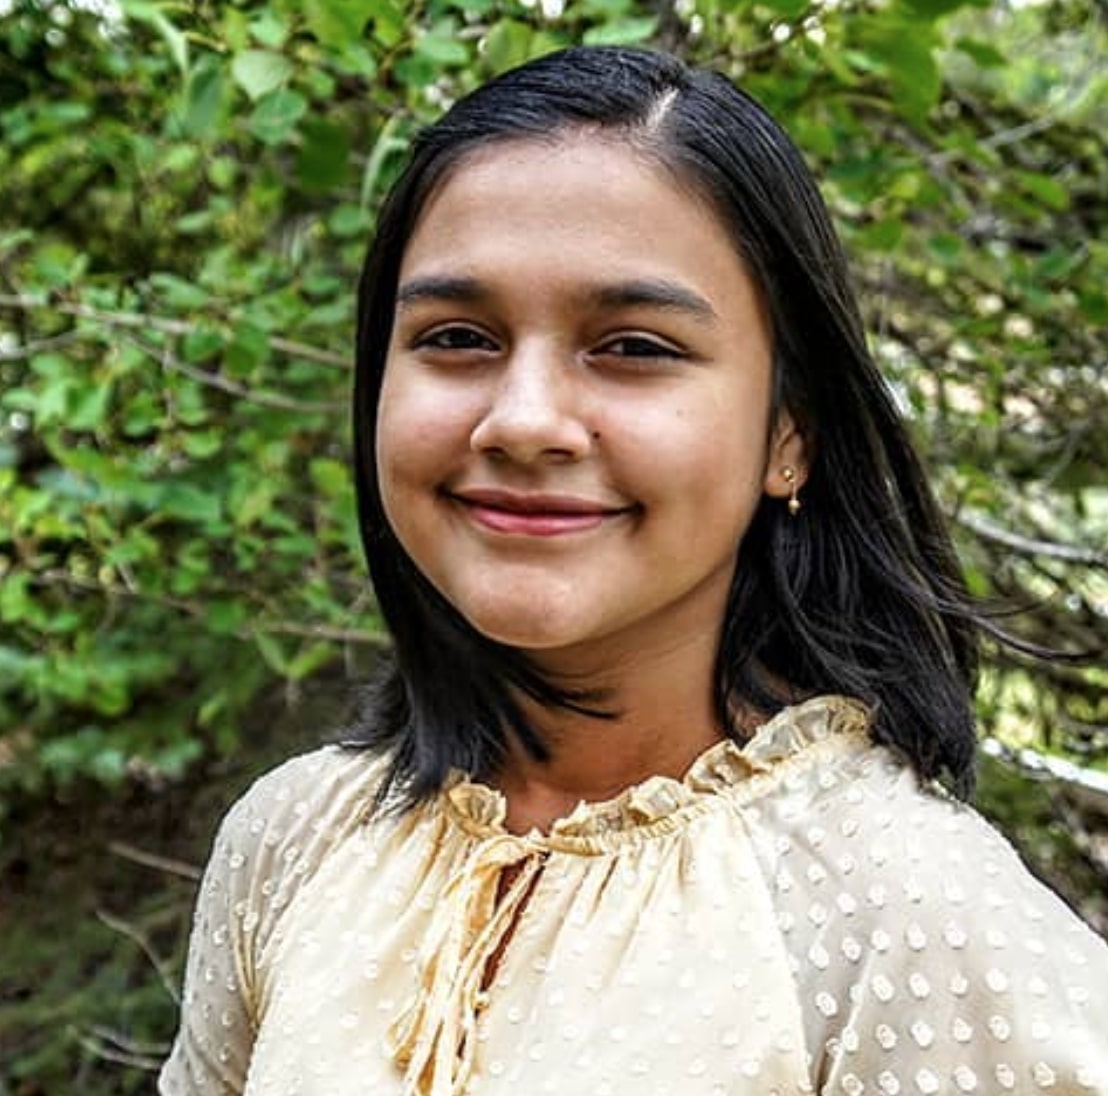 TIME'S Kid Of Year Is Scientist And Inventor Gitanjali Rao